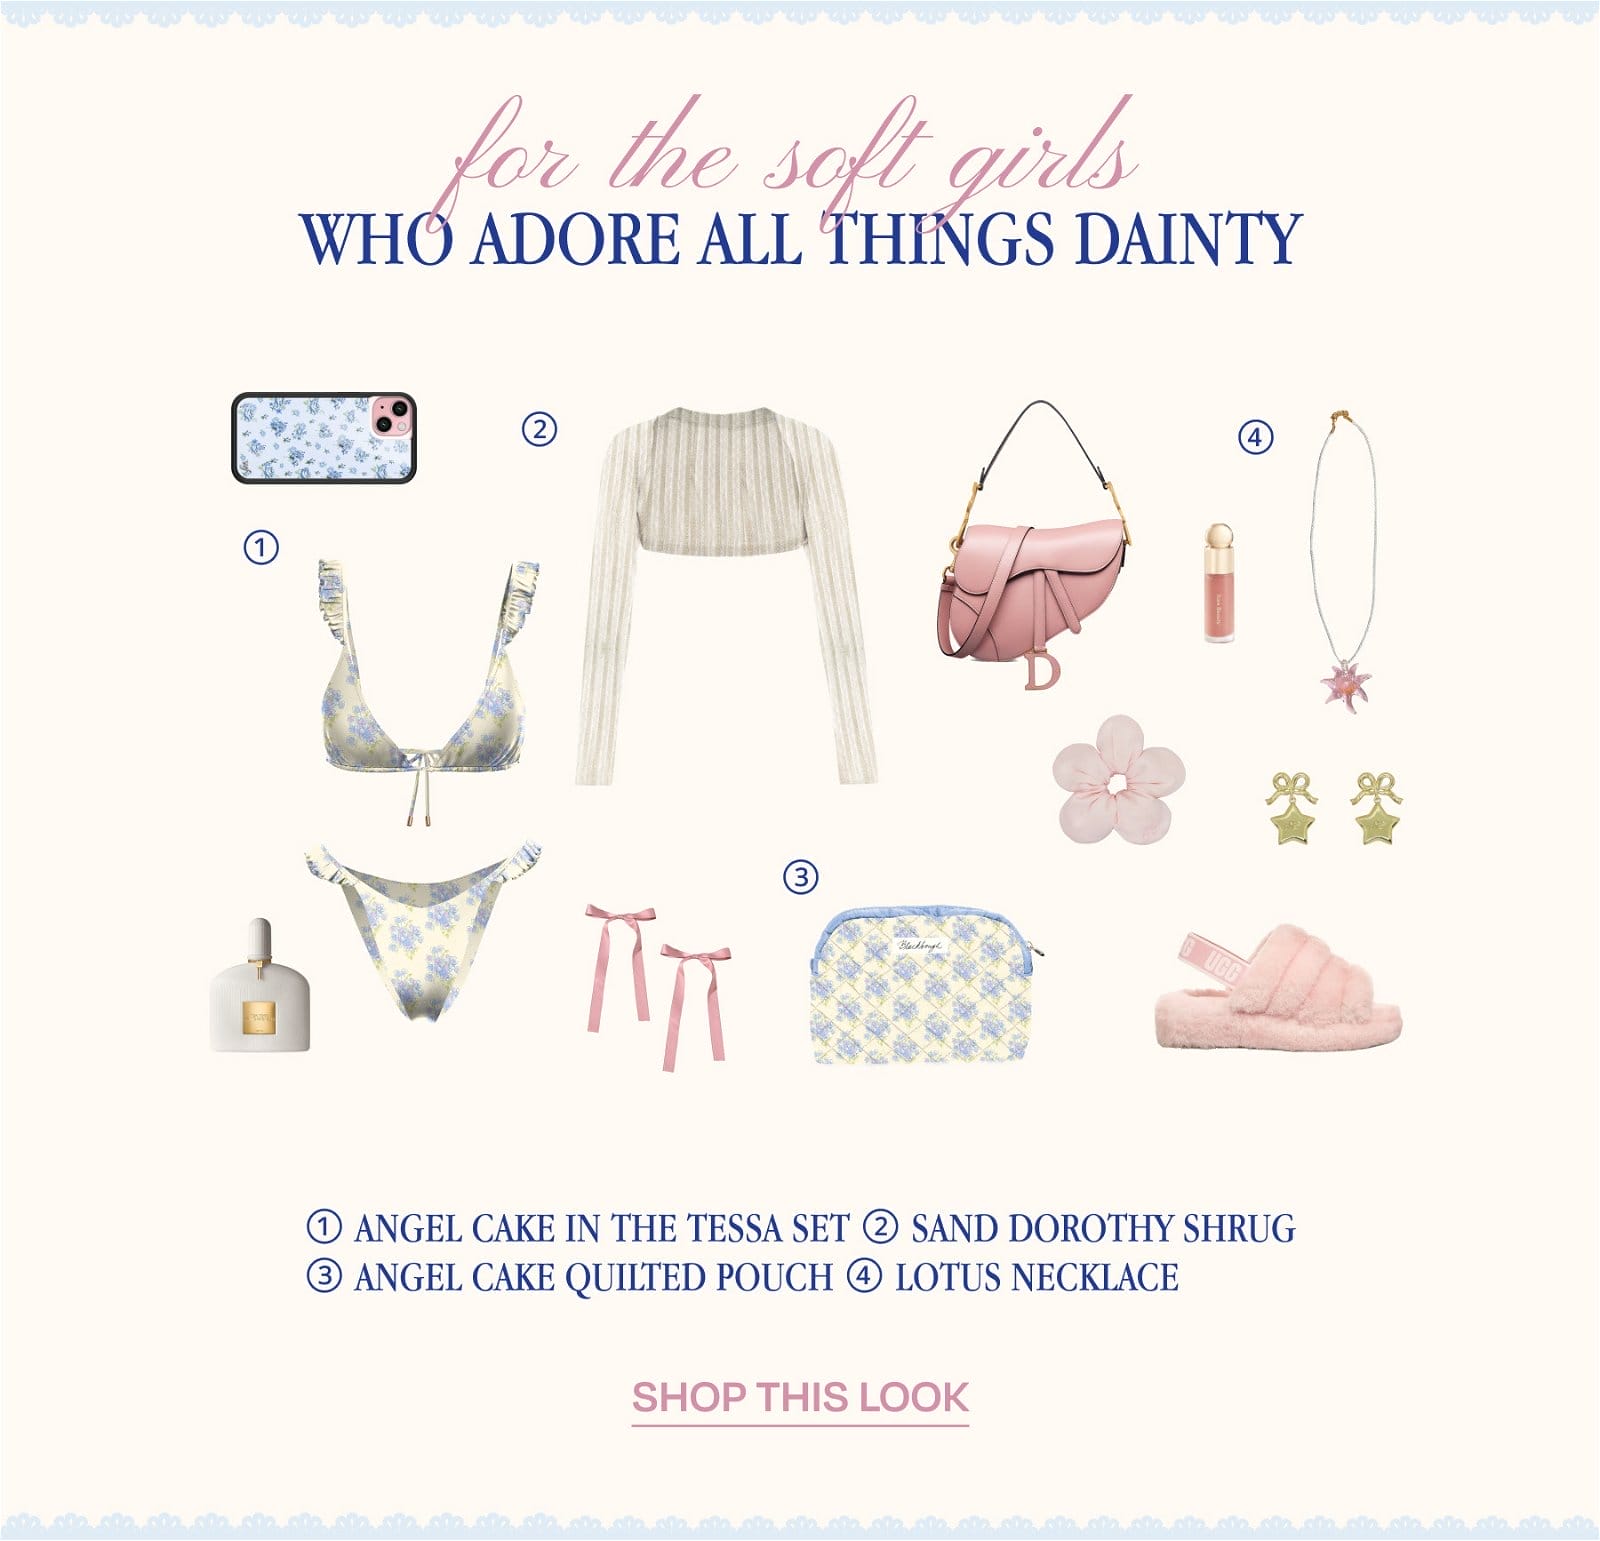 FOR THE SOFT GIRLS WHO ADORE ALL THINGS DAINTY